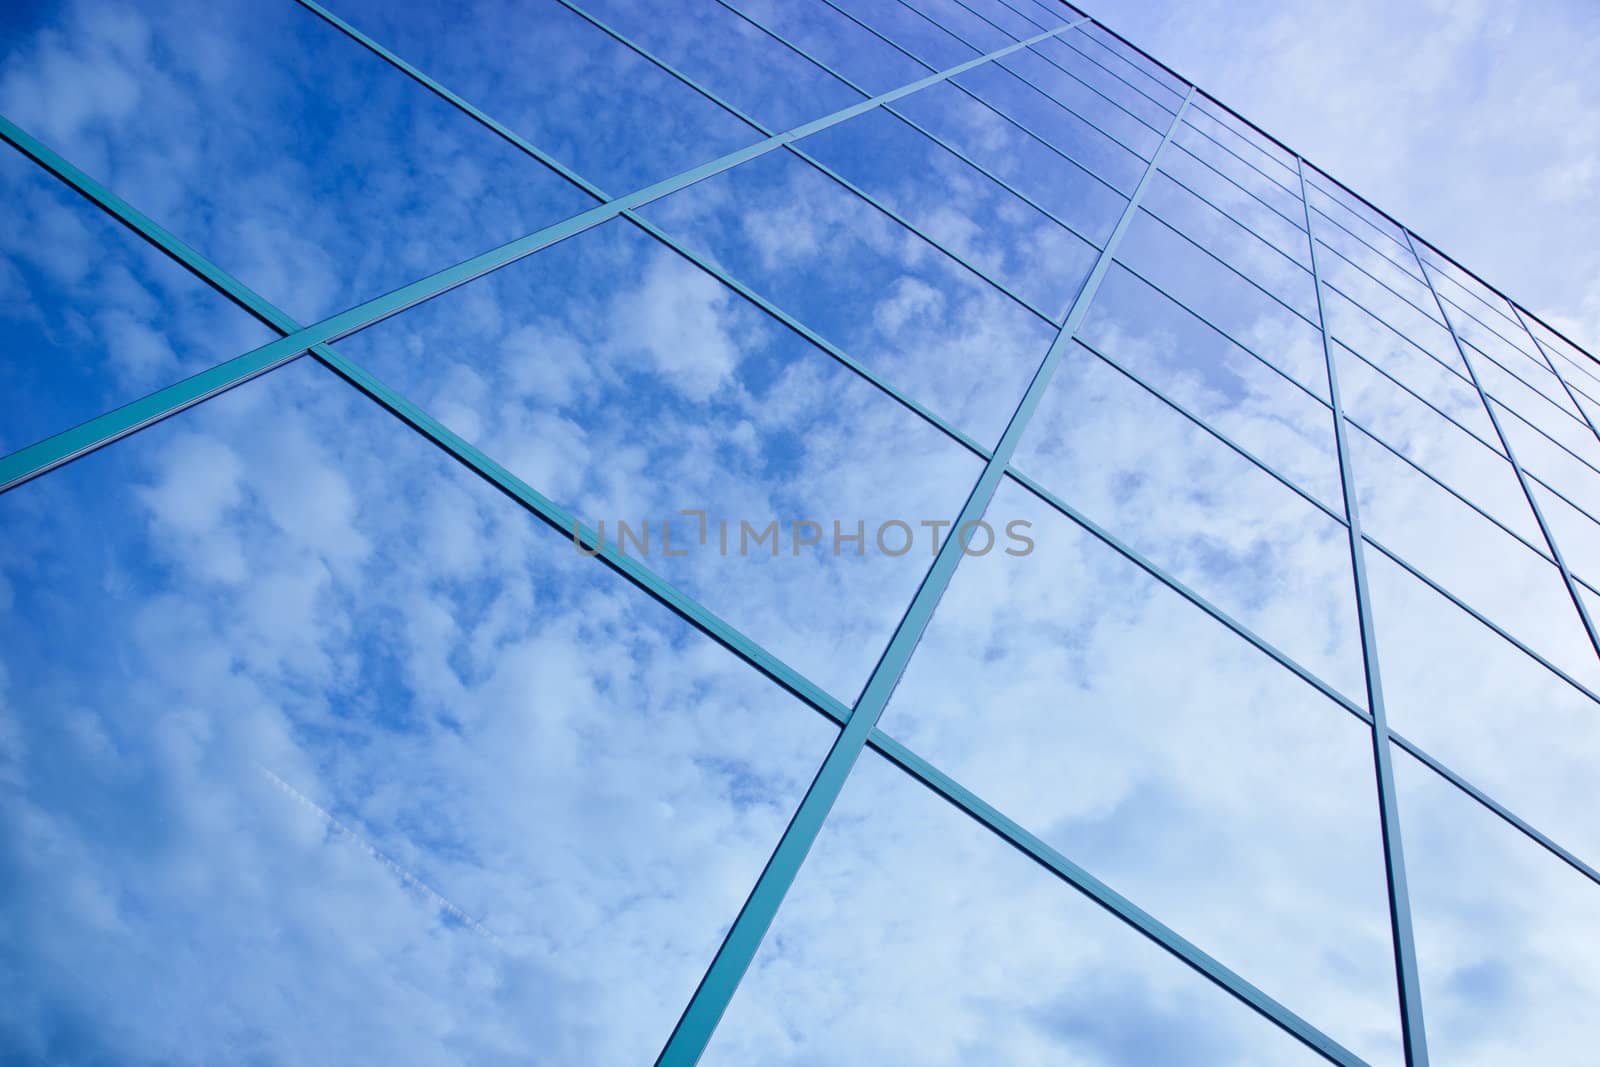 reflections of clouds and blue sky in facade of office building